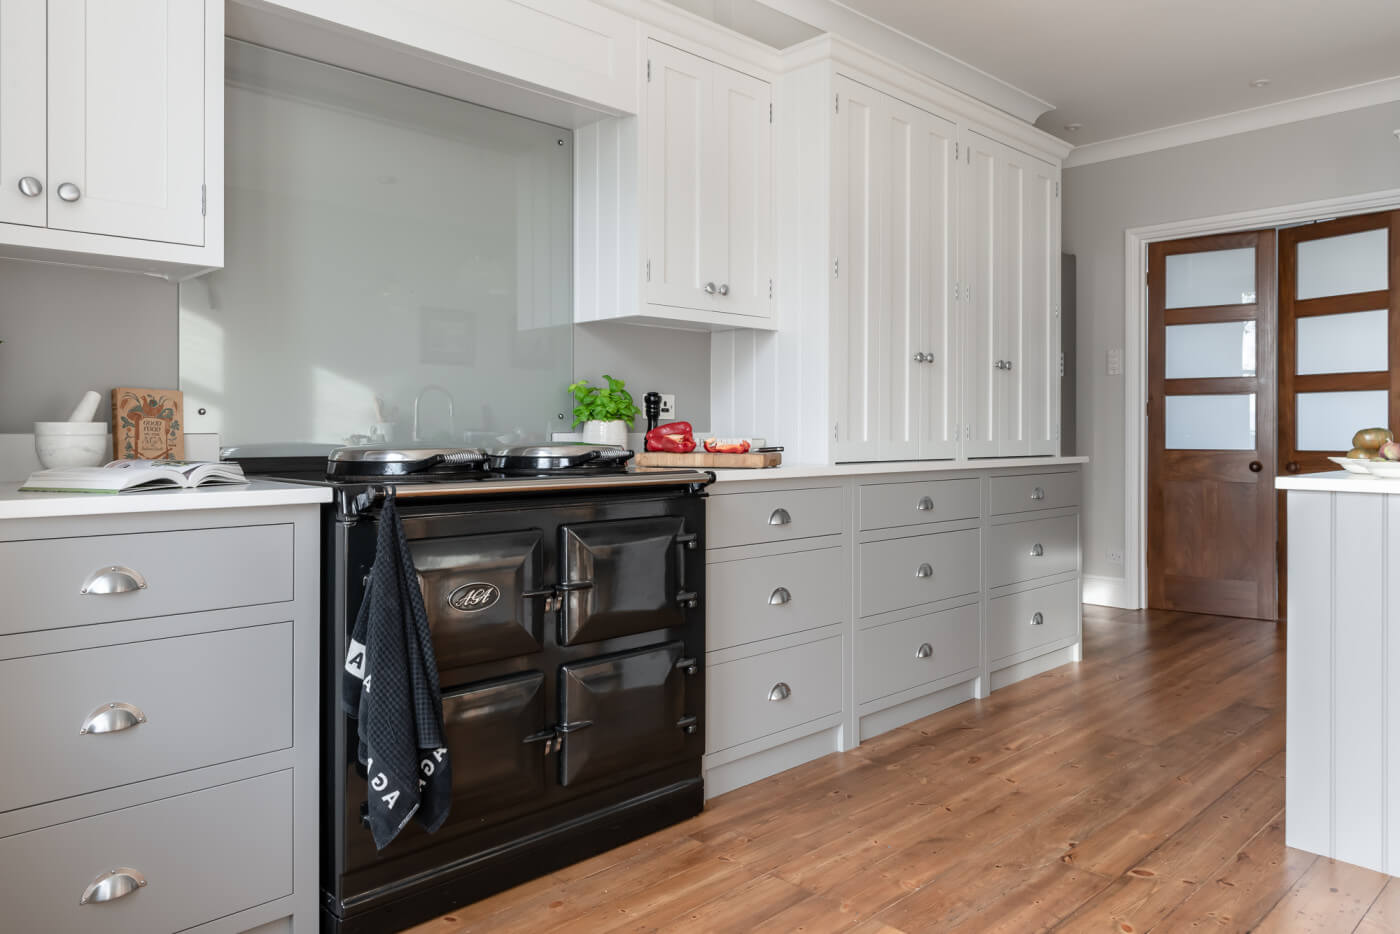 AGA Cookers in Period Property renovations